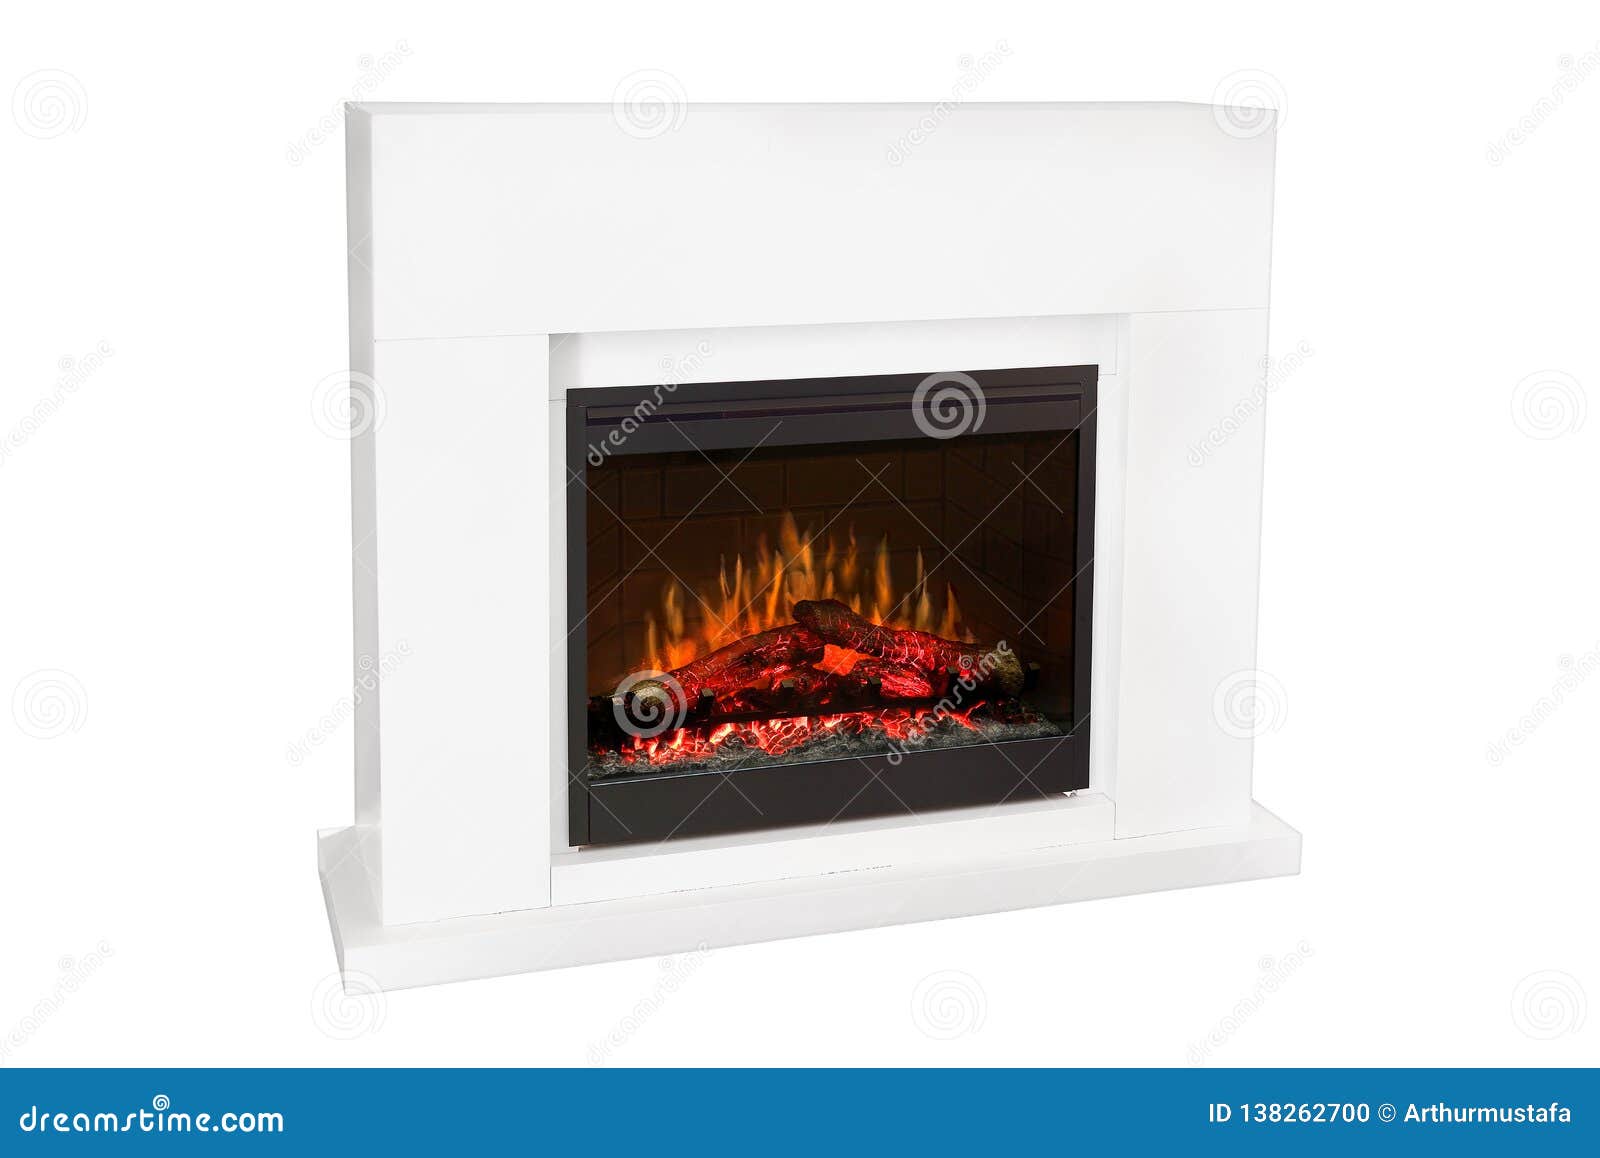 White Wooden Burning Fireplace With Roaring Flames Isolated On White Background Clipping Path Included Modern Design Fireplace Stock Photo Image Of Flame Flat 138262700,History Of Floral Design Crossword Answers